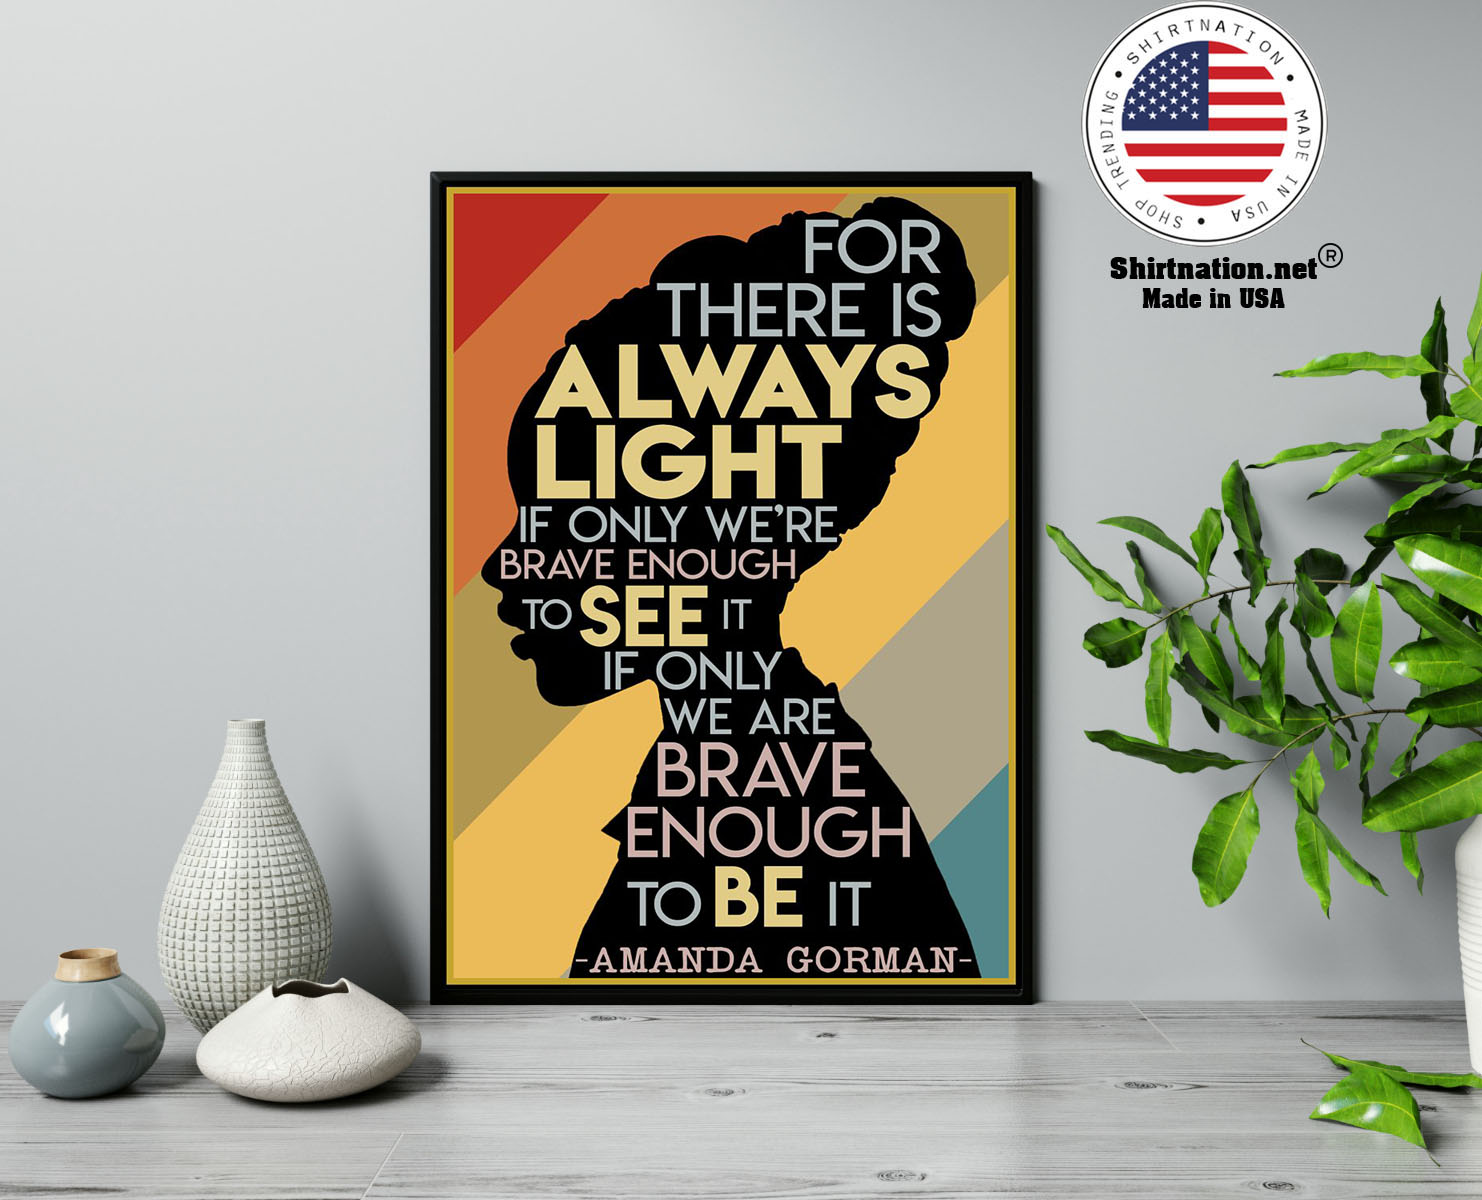 Amanda Gorman Hill we climb for there is always light poster 13